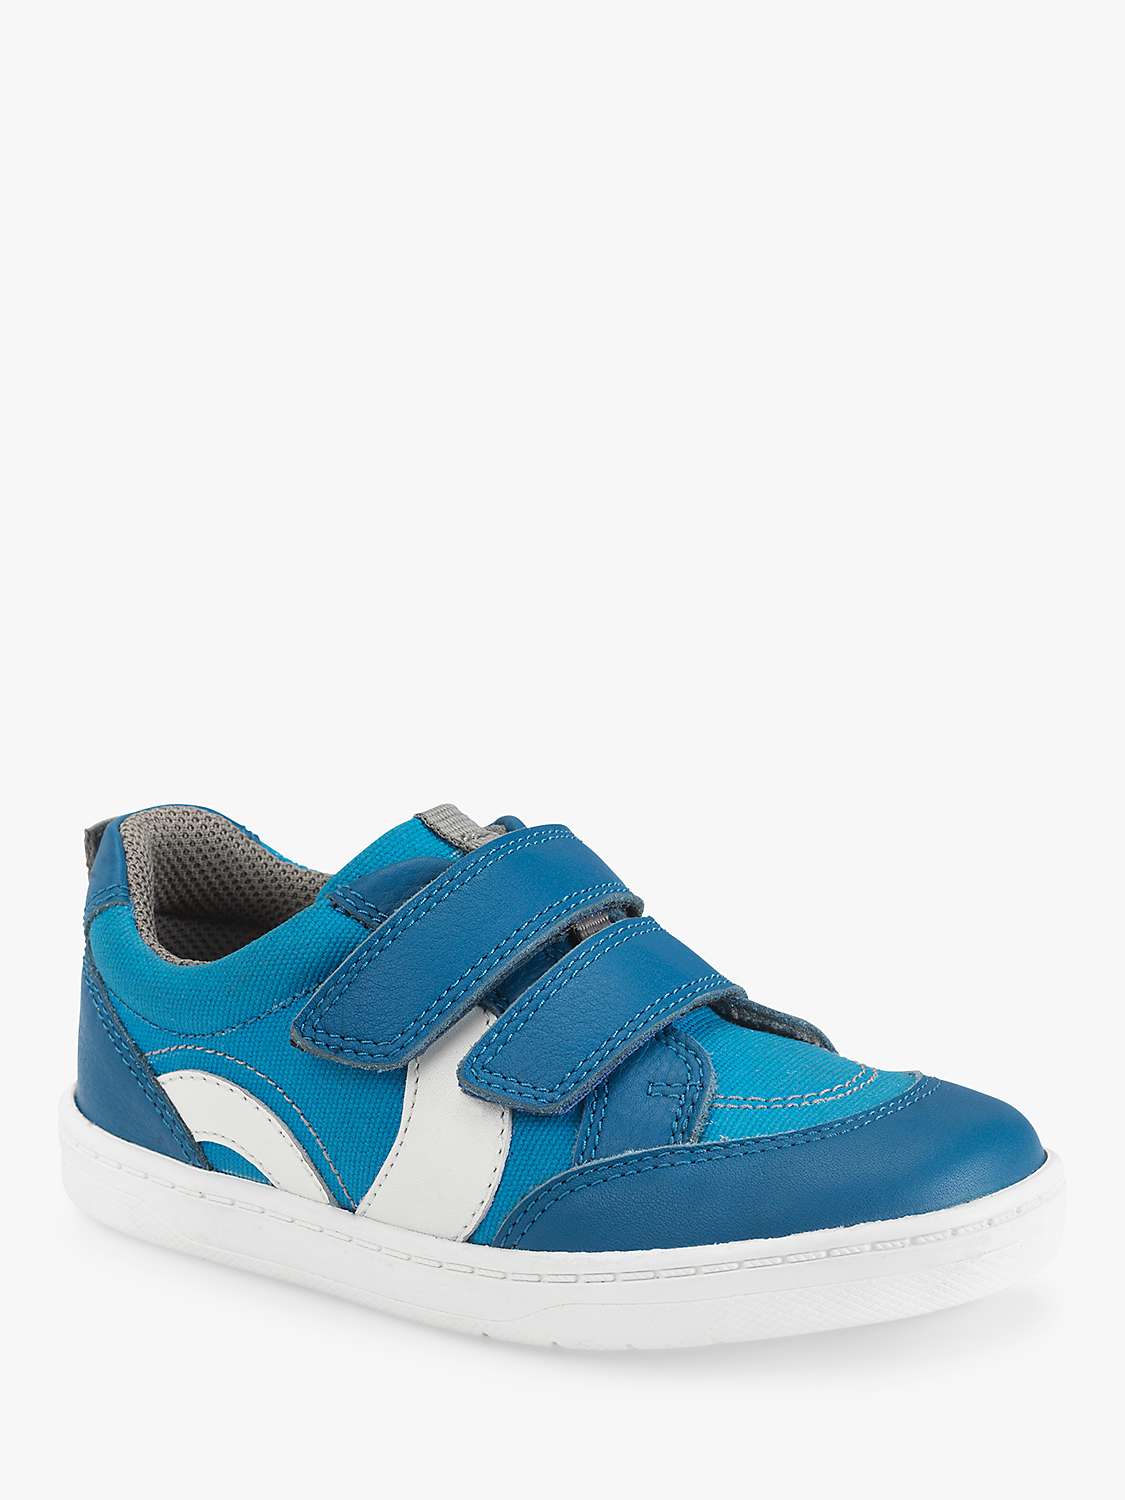 Buy Start-Rite Kids' Enigma Leather Trainers, Bright Blue Online at johnlewis.com